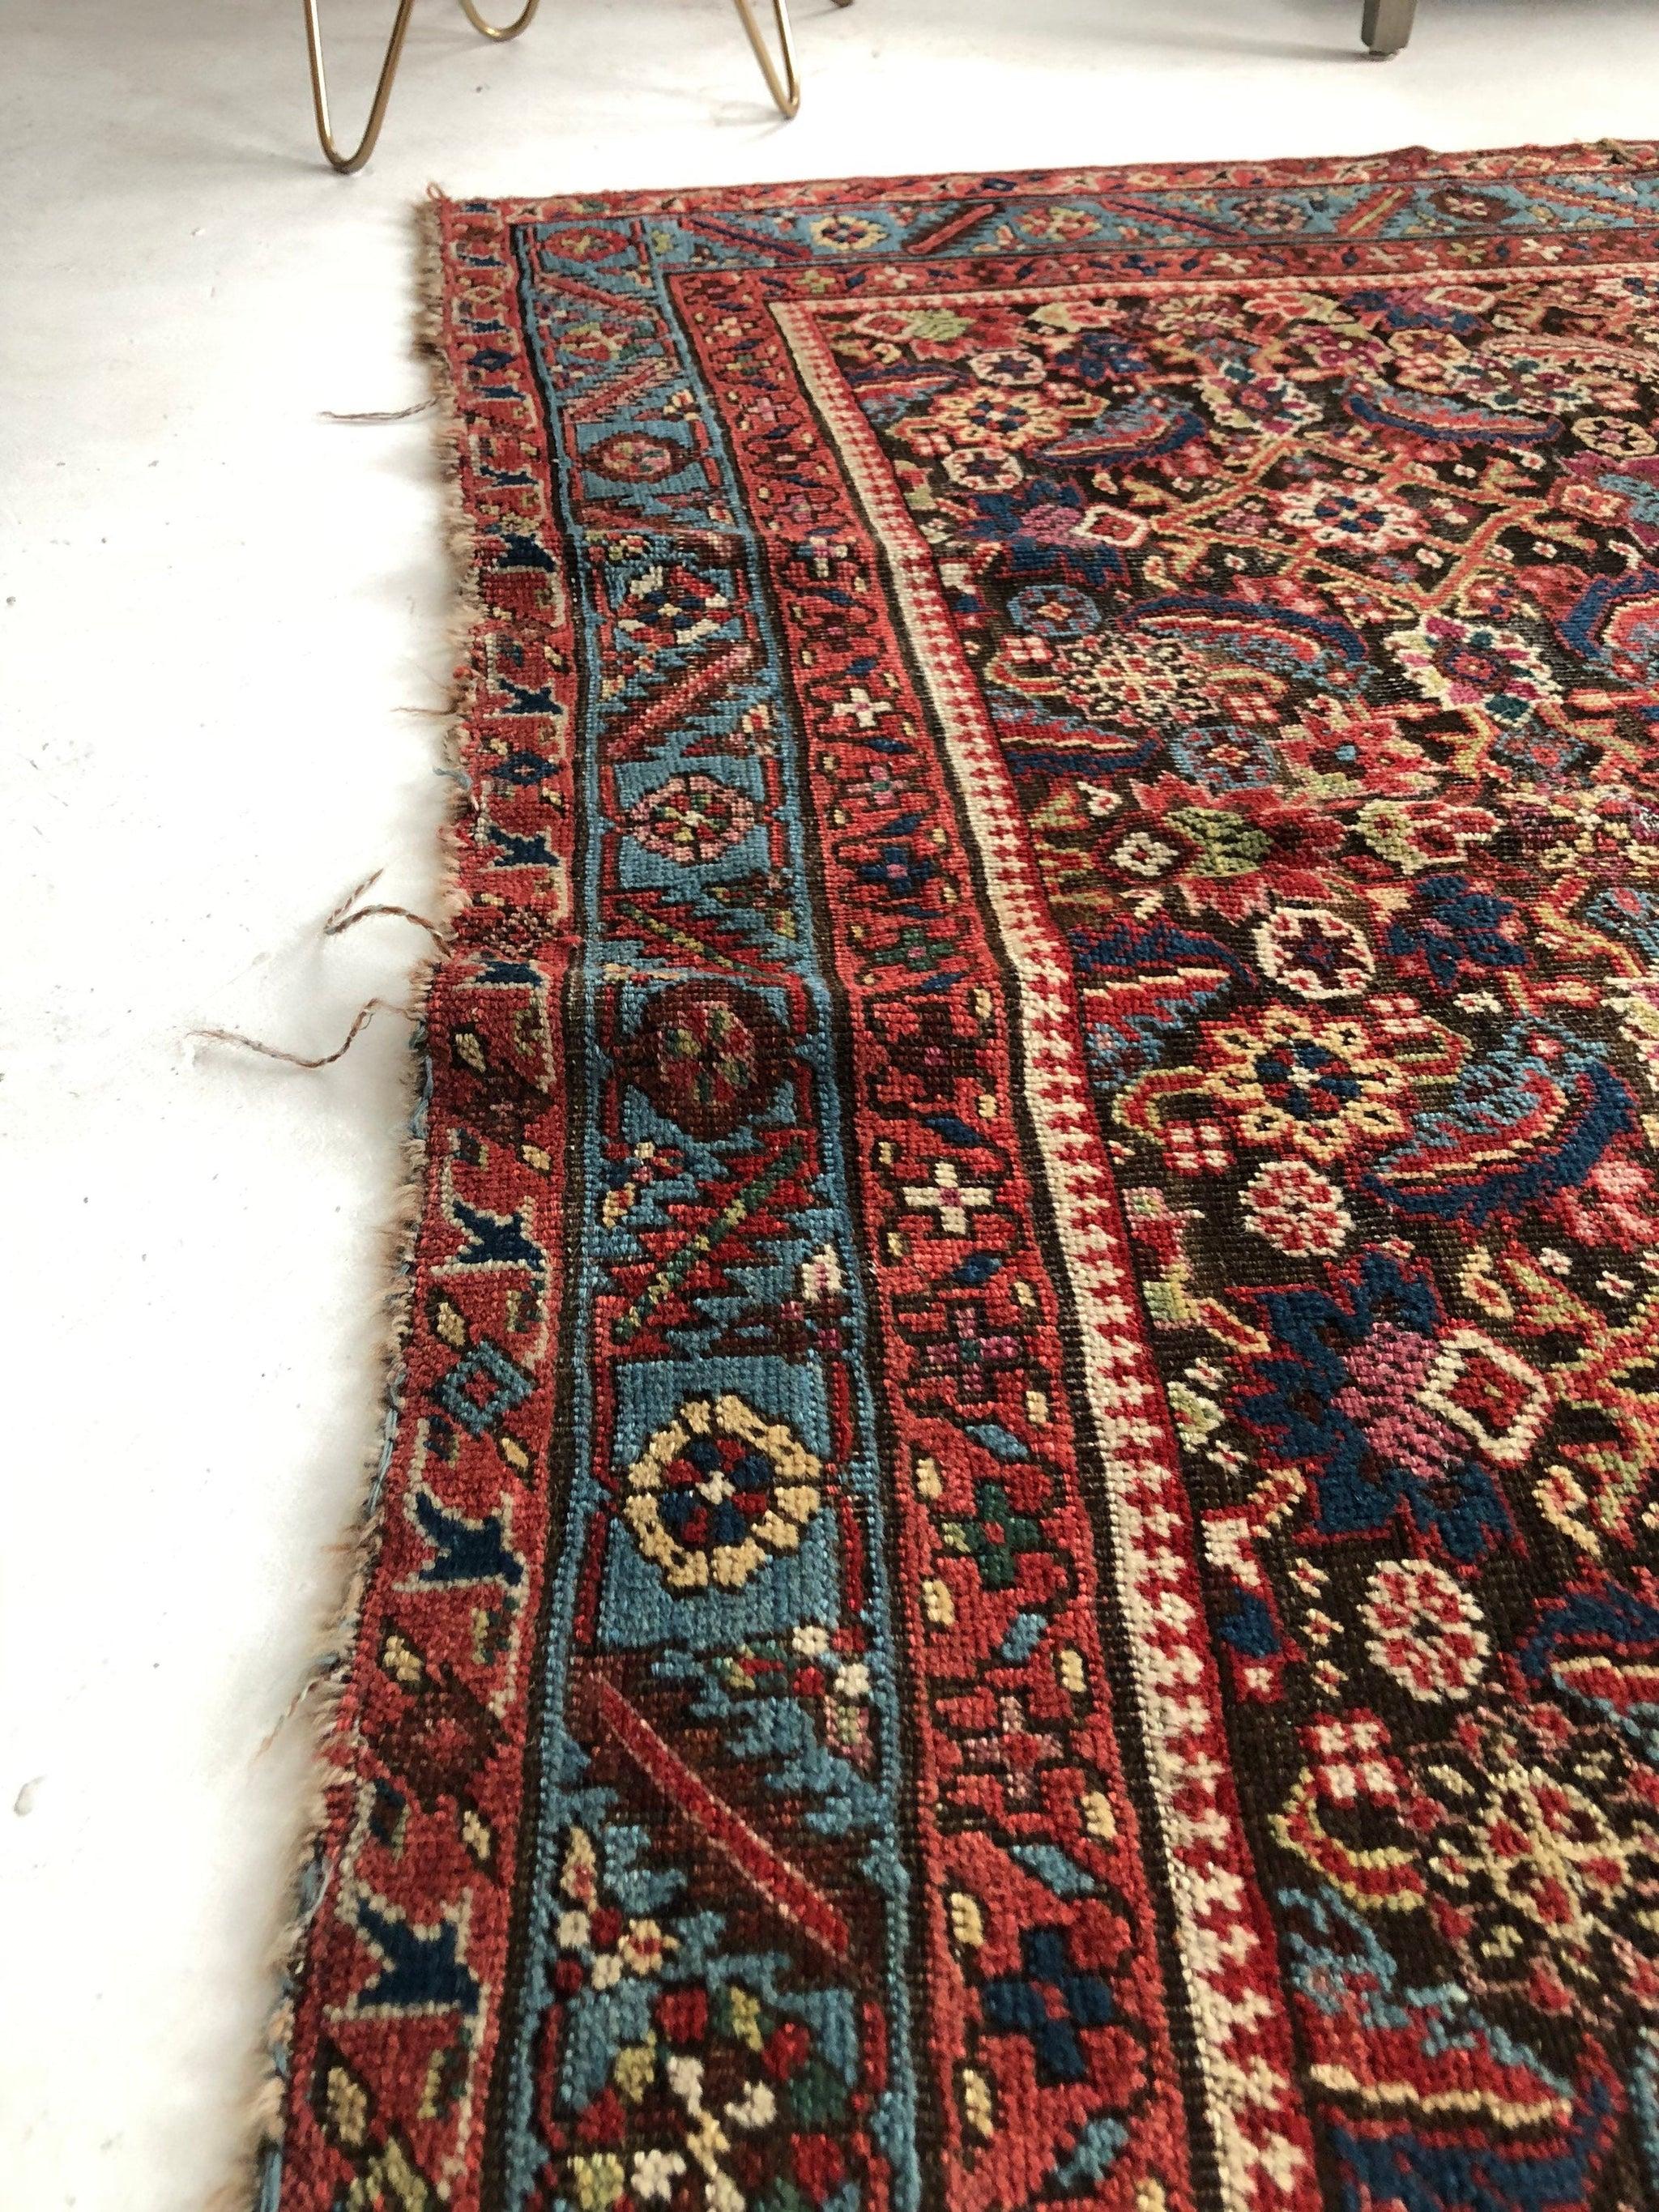 Andrei beautiful European sized ancient rug

About: The size alone is rare, let alone the unbelievable color palette; eggplant, magenta, lilac, ice blue, honey-yellow, soft rust, antique beige, lake blue/french blue, sky blue, hints of grass green